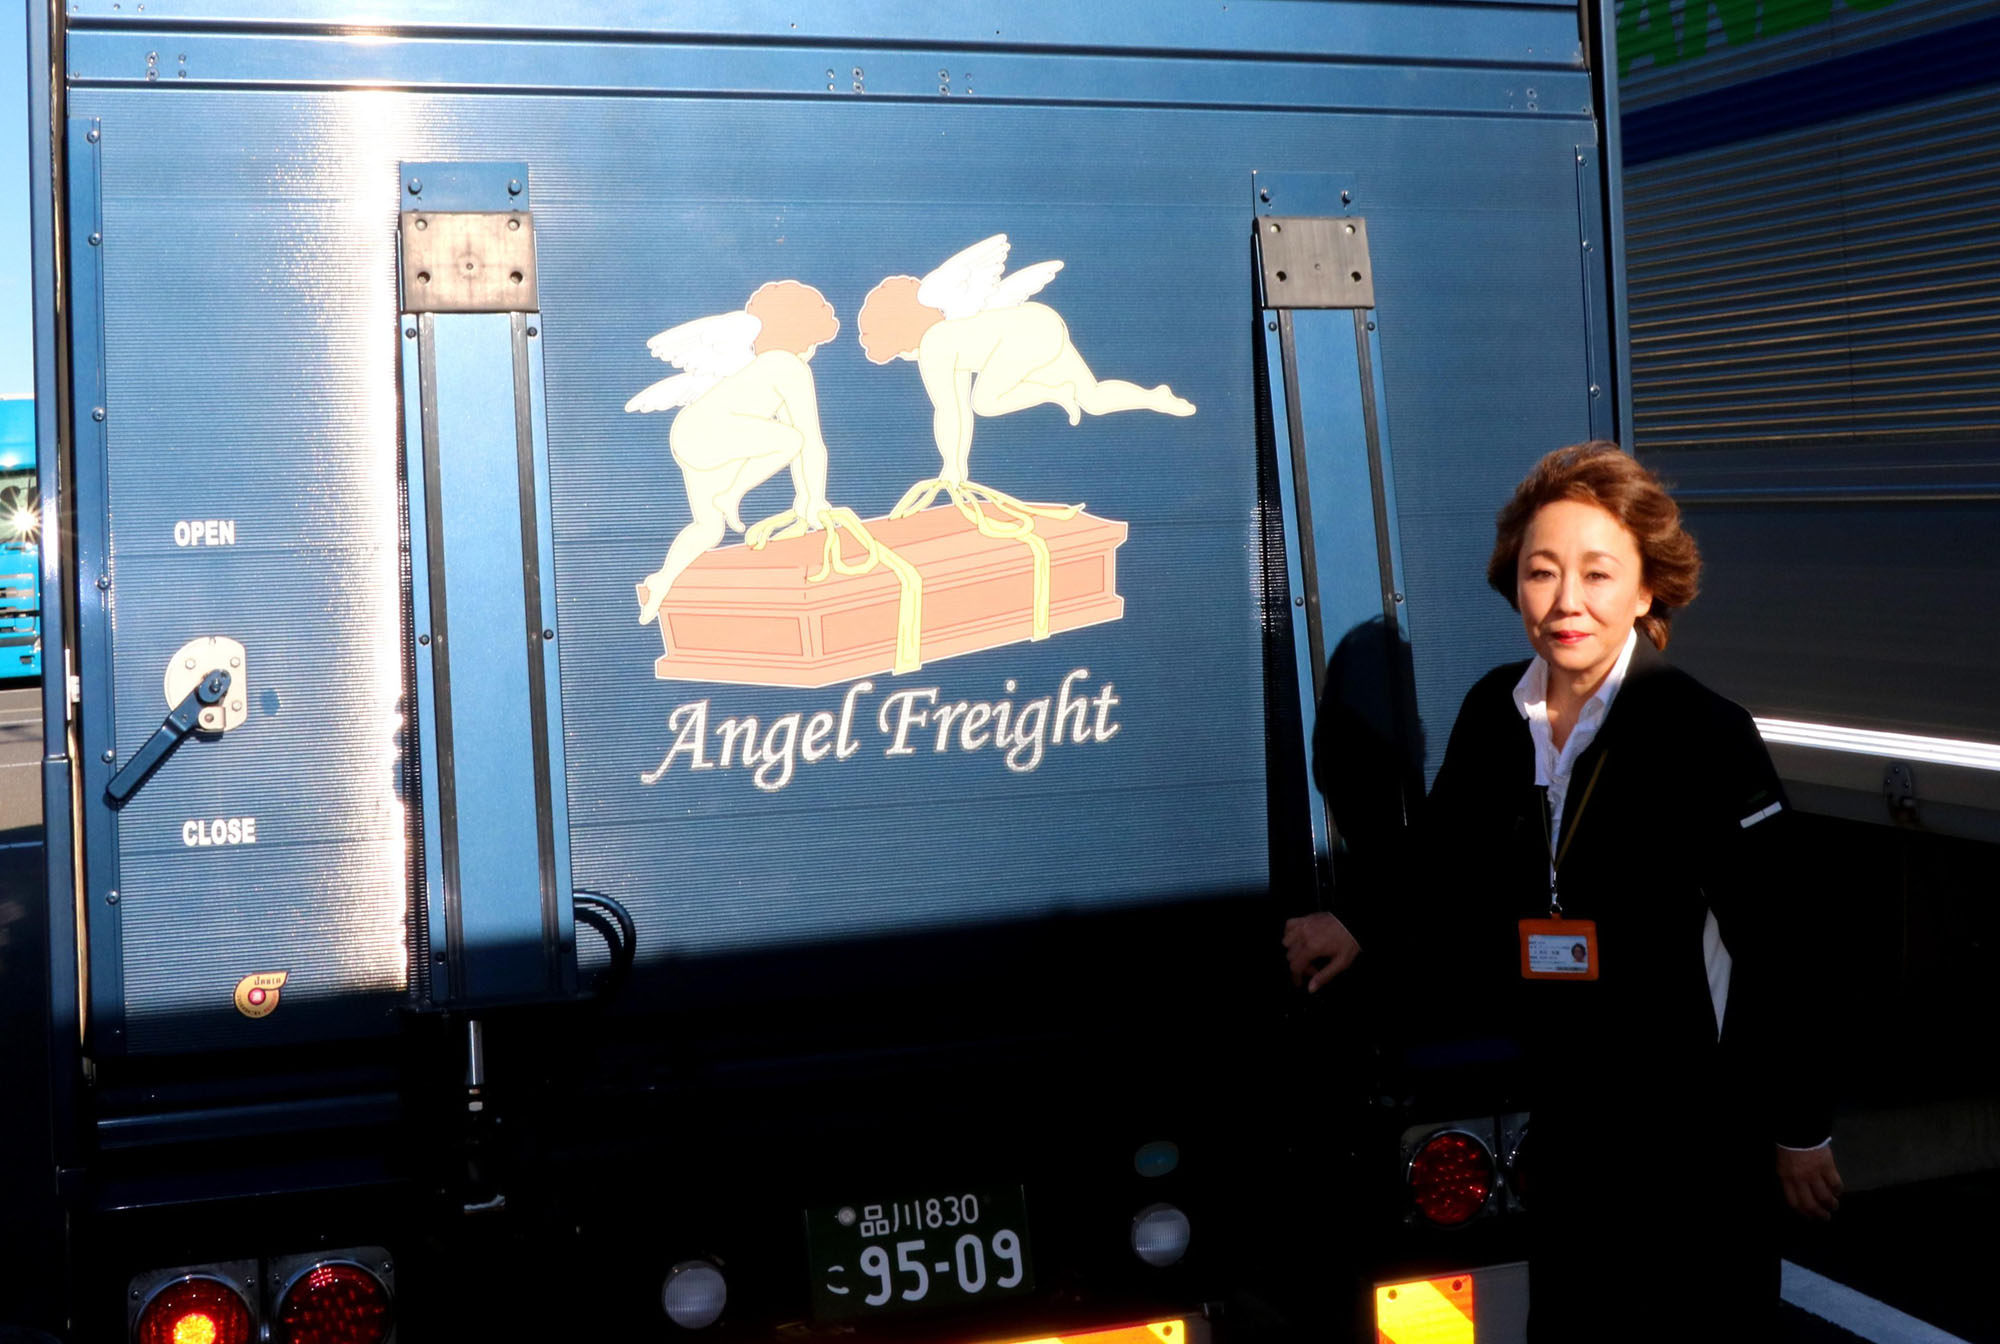 Airhearse International Inc. President Rie Kimura stands next to the company's Angel Freight logo, which appears on the rear door of a truck used as a preparation site for bodies, in the cargo area at Haneda airport in Tokyo on Oct. 23. | KYODO